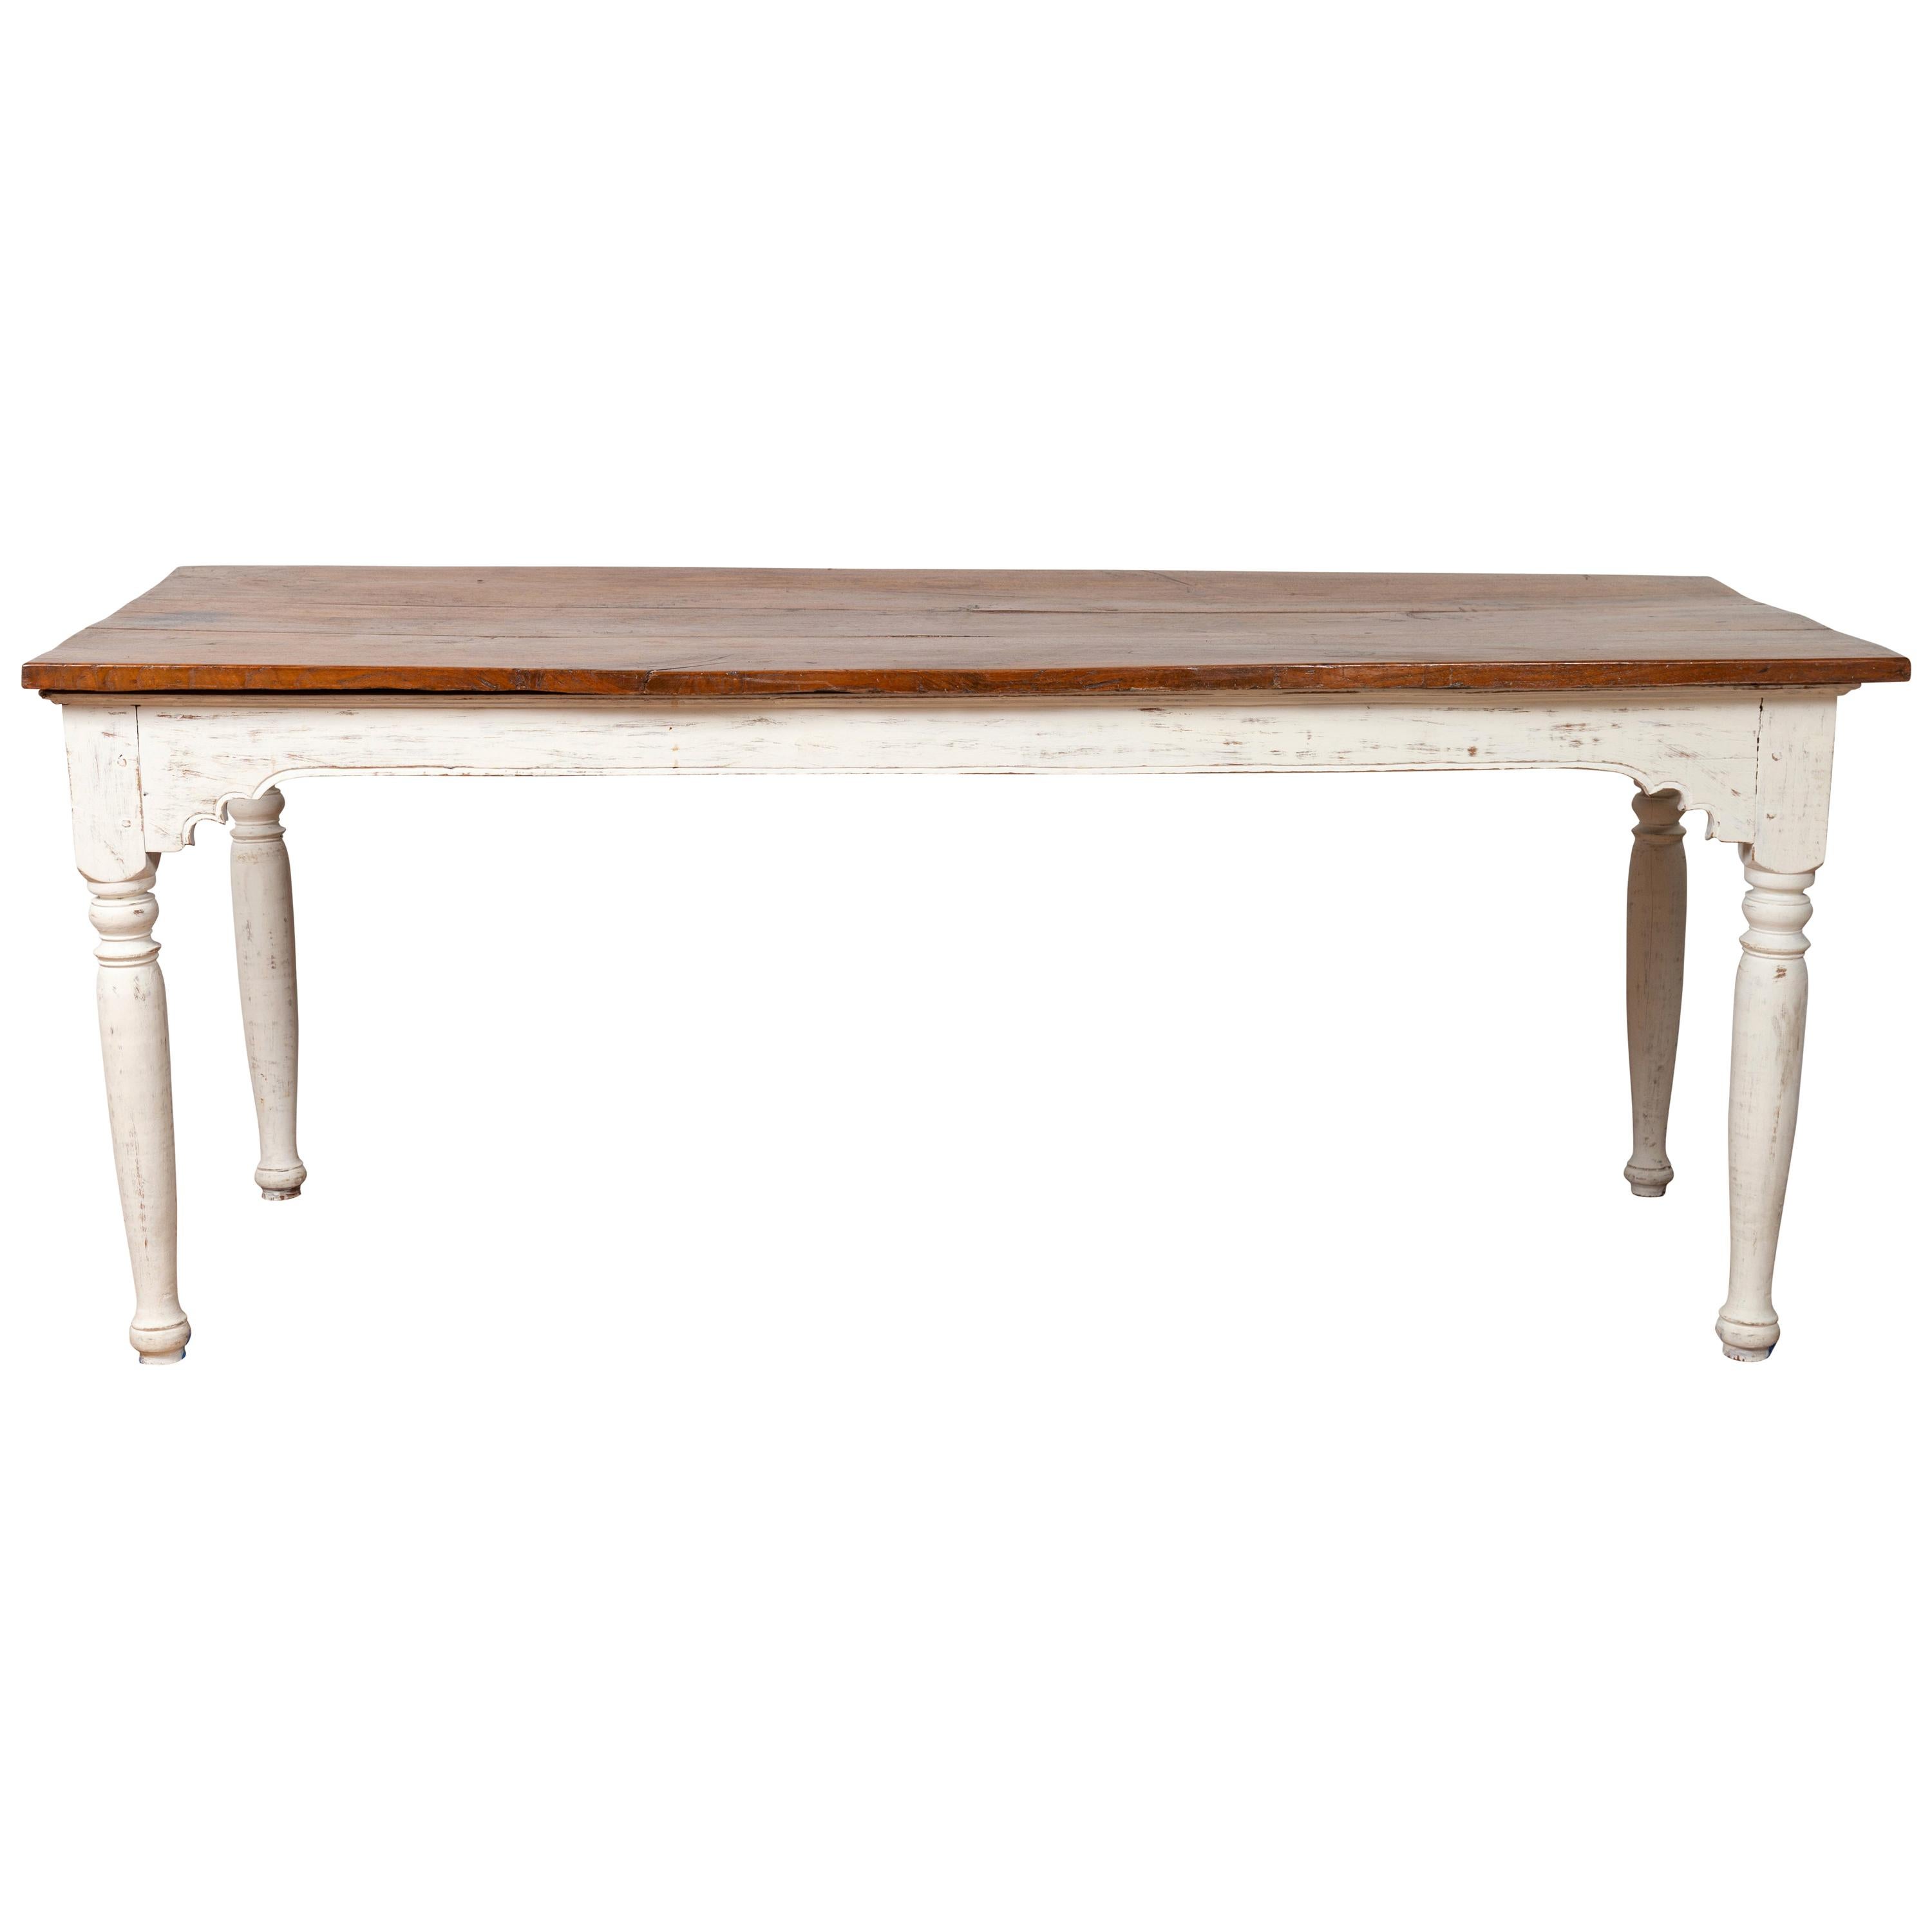 Dutch Colonial Dining Table with Wooden Top over White Painted Turned Base